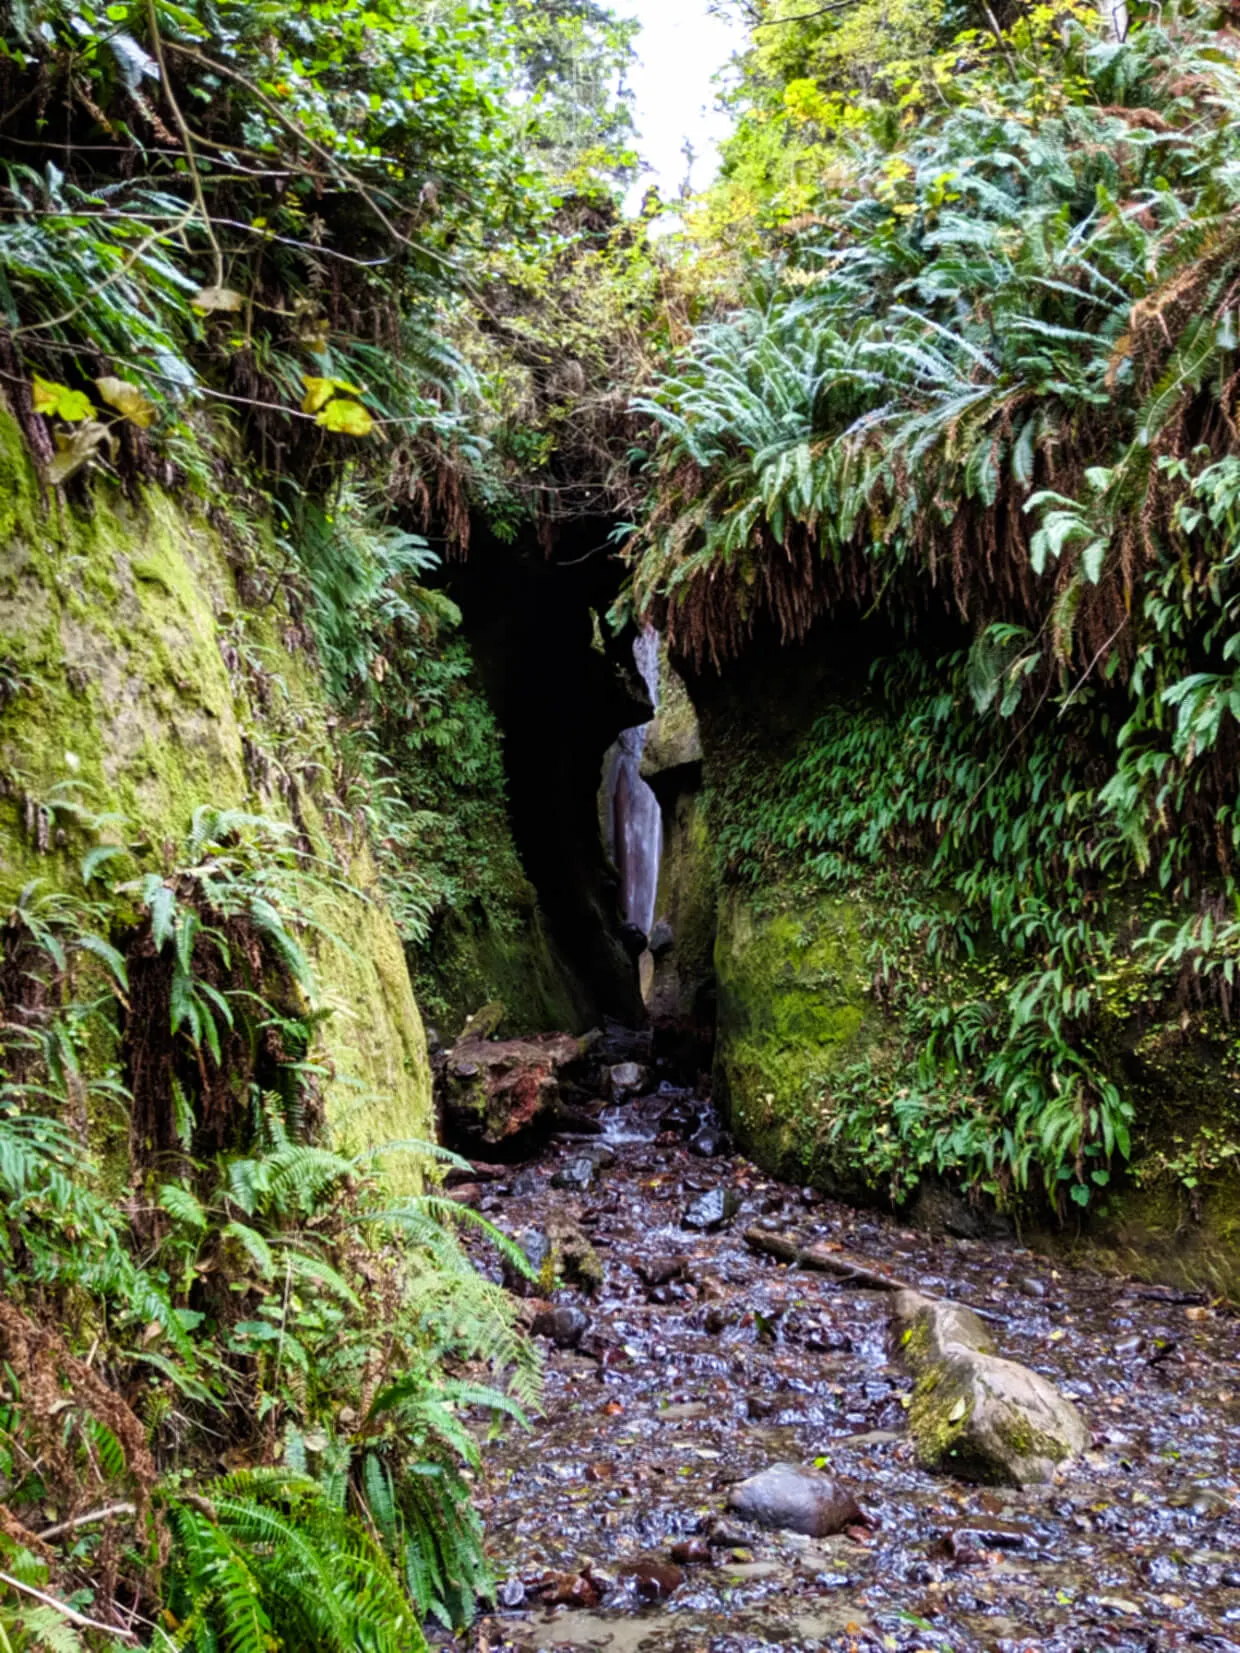 A mossy, narrow canyon leads to a thin waterfall at the end